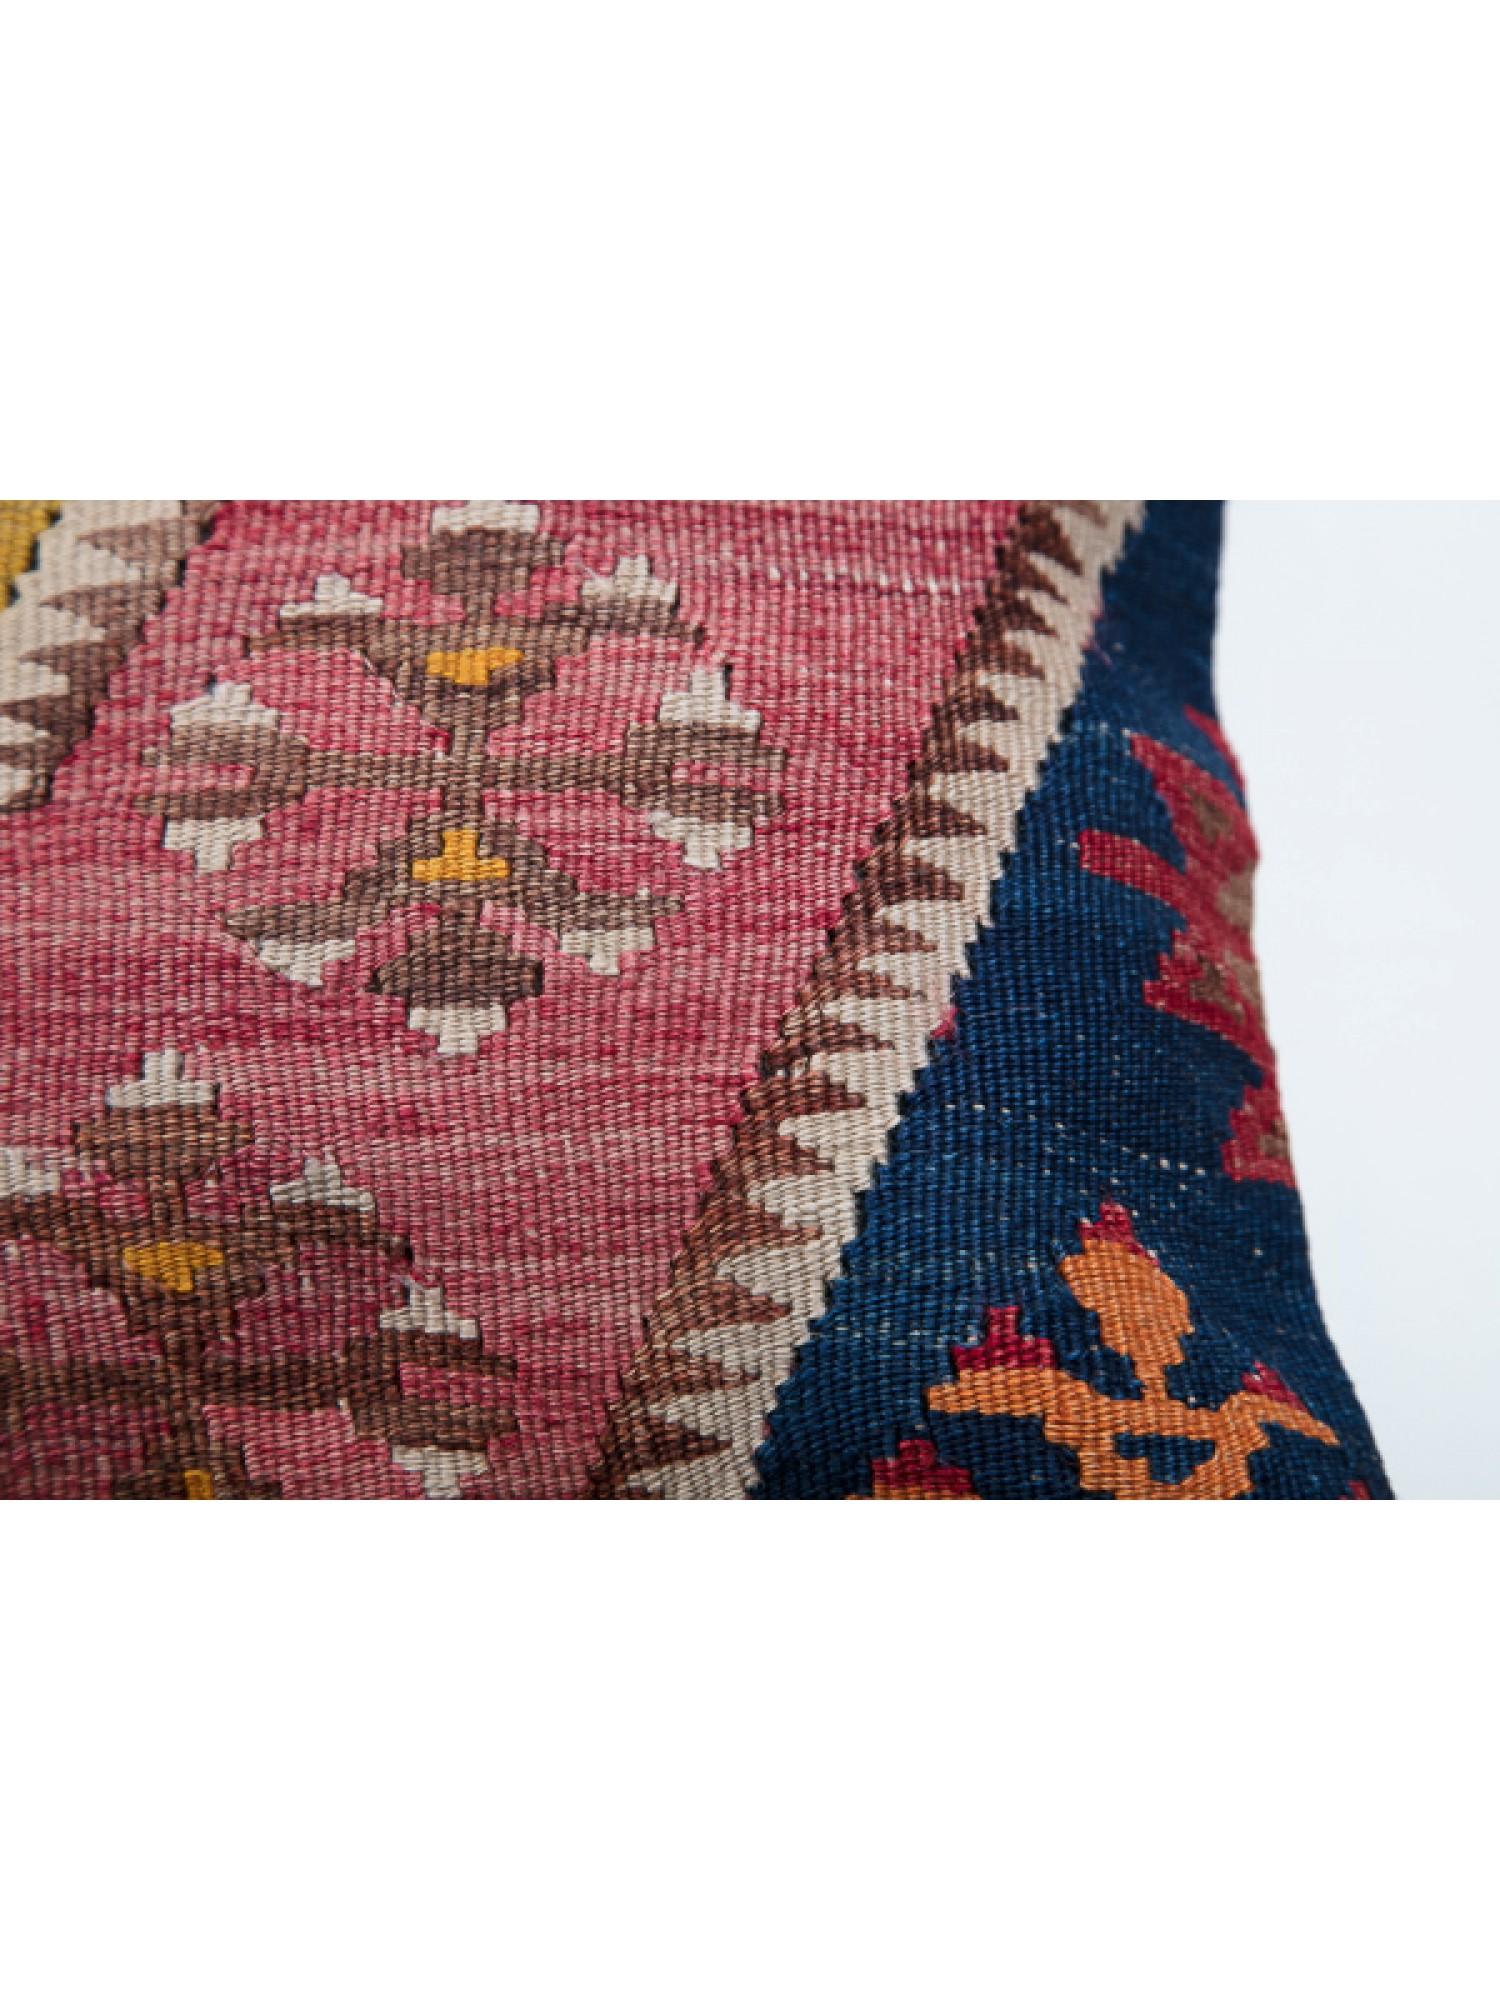 Contemporary Antique & Old Kilim Cushion Cover, Anatolian Yastik Turkish Modern Pillow KC3500 For Sale